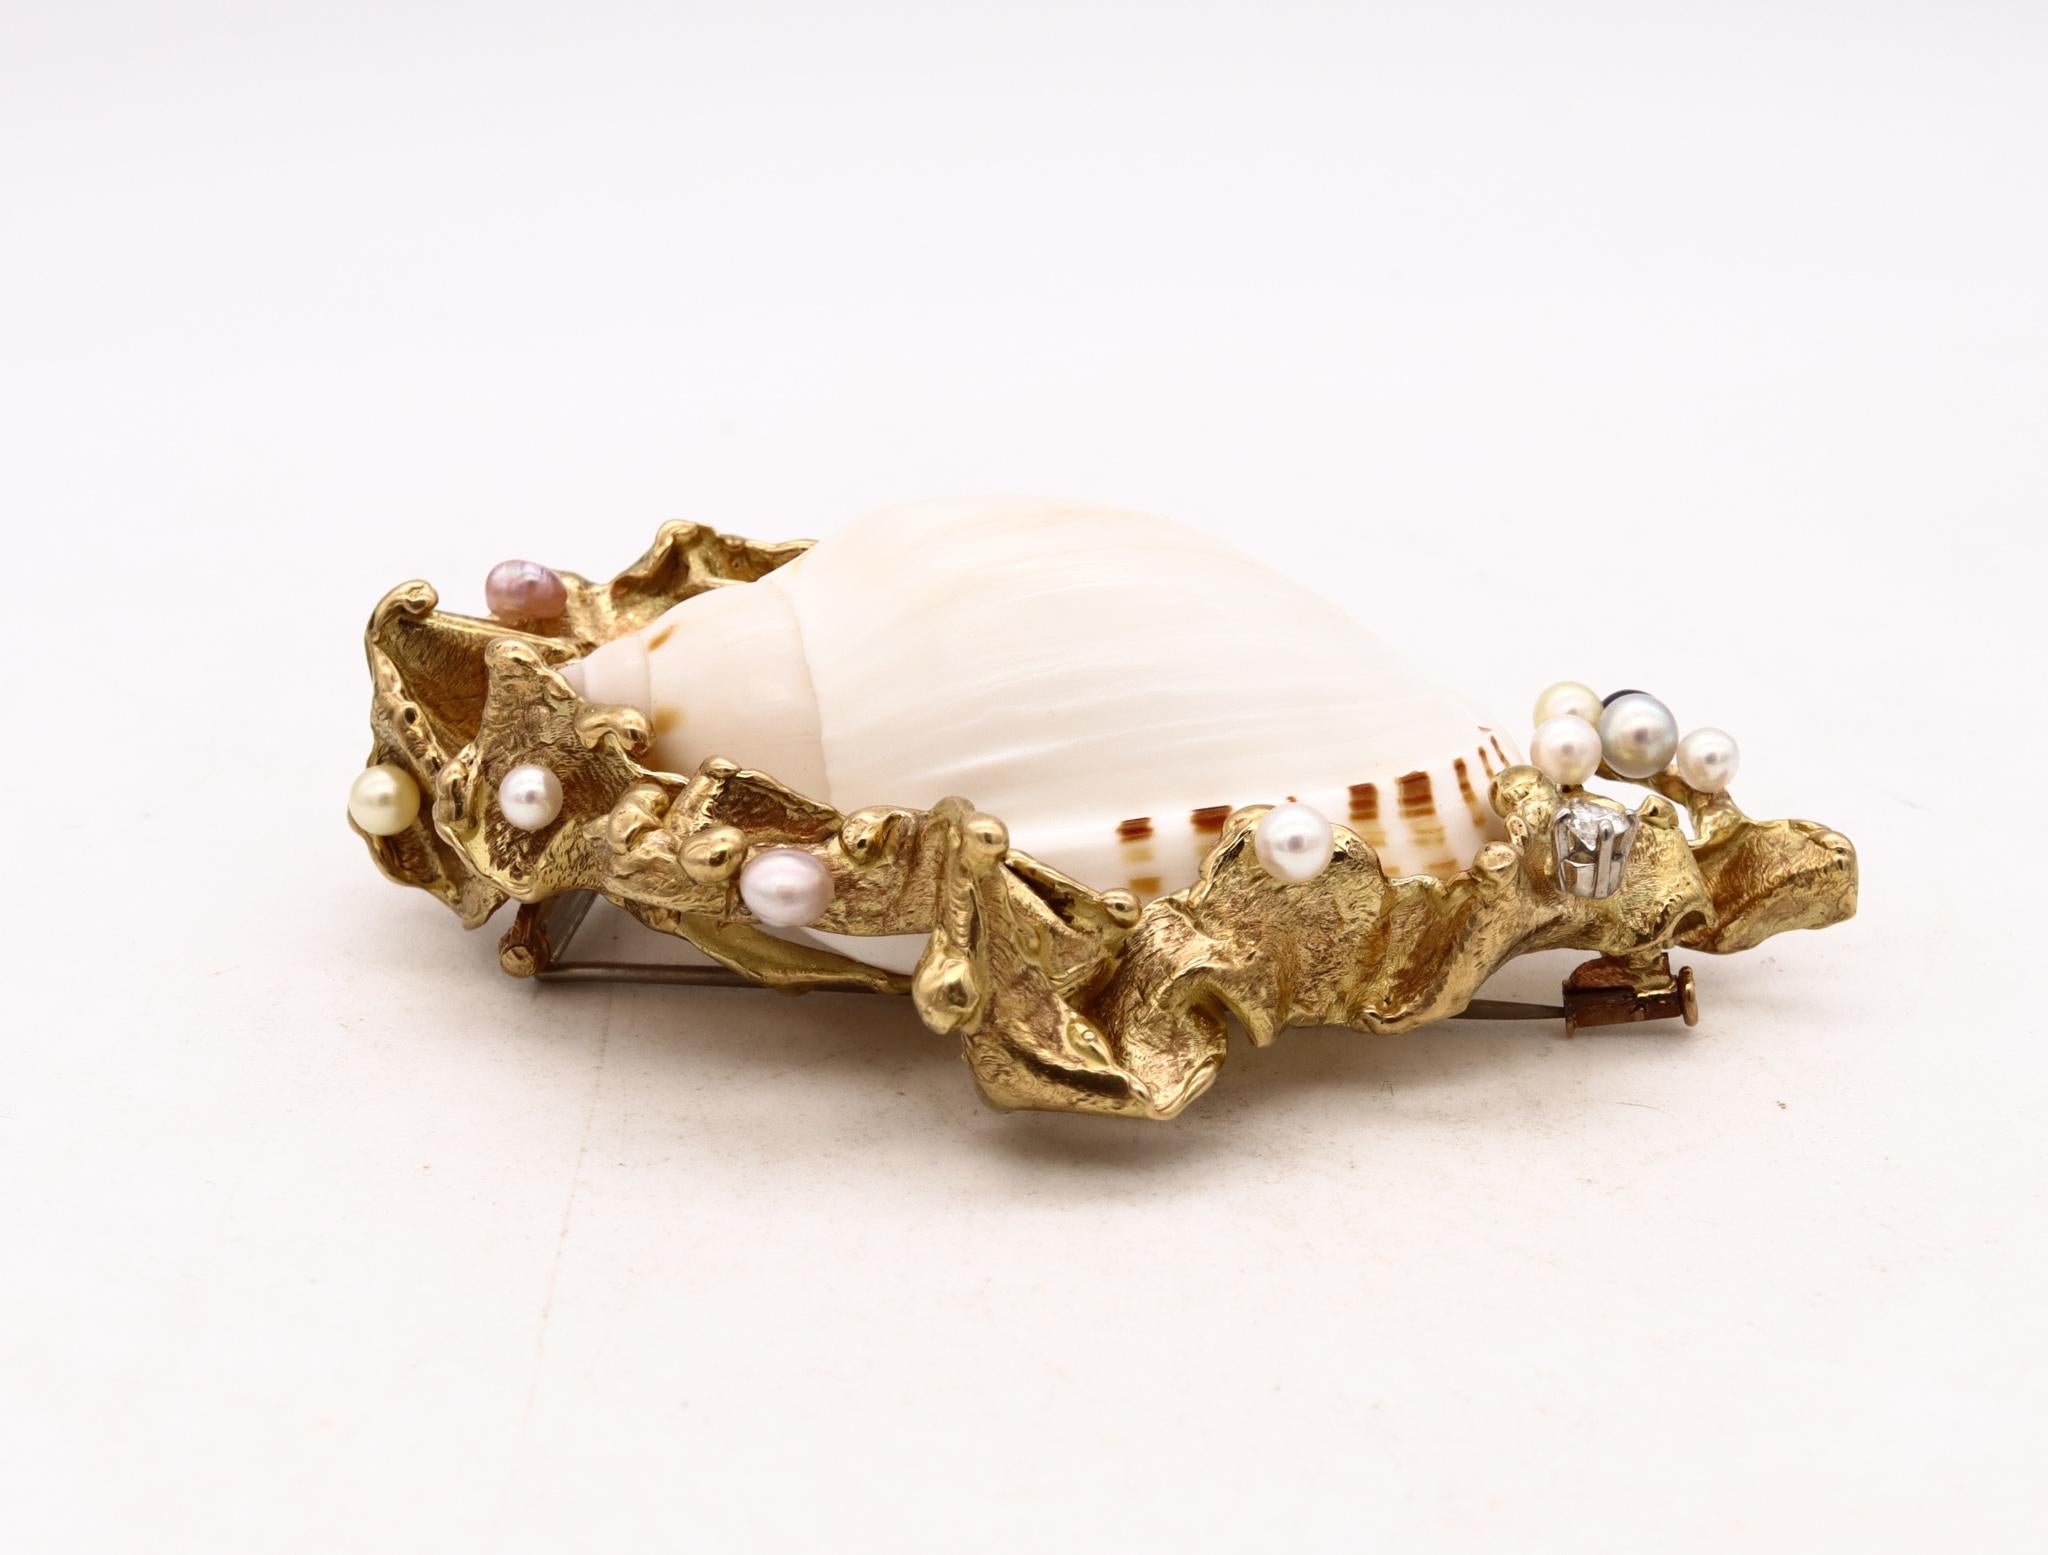 Gilbert Albert 1970 Swiss Modernist Pendant Brooch In 18Kt Gold Shell And Pearls In Excellent Condition For Sale In Miami, FL